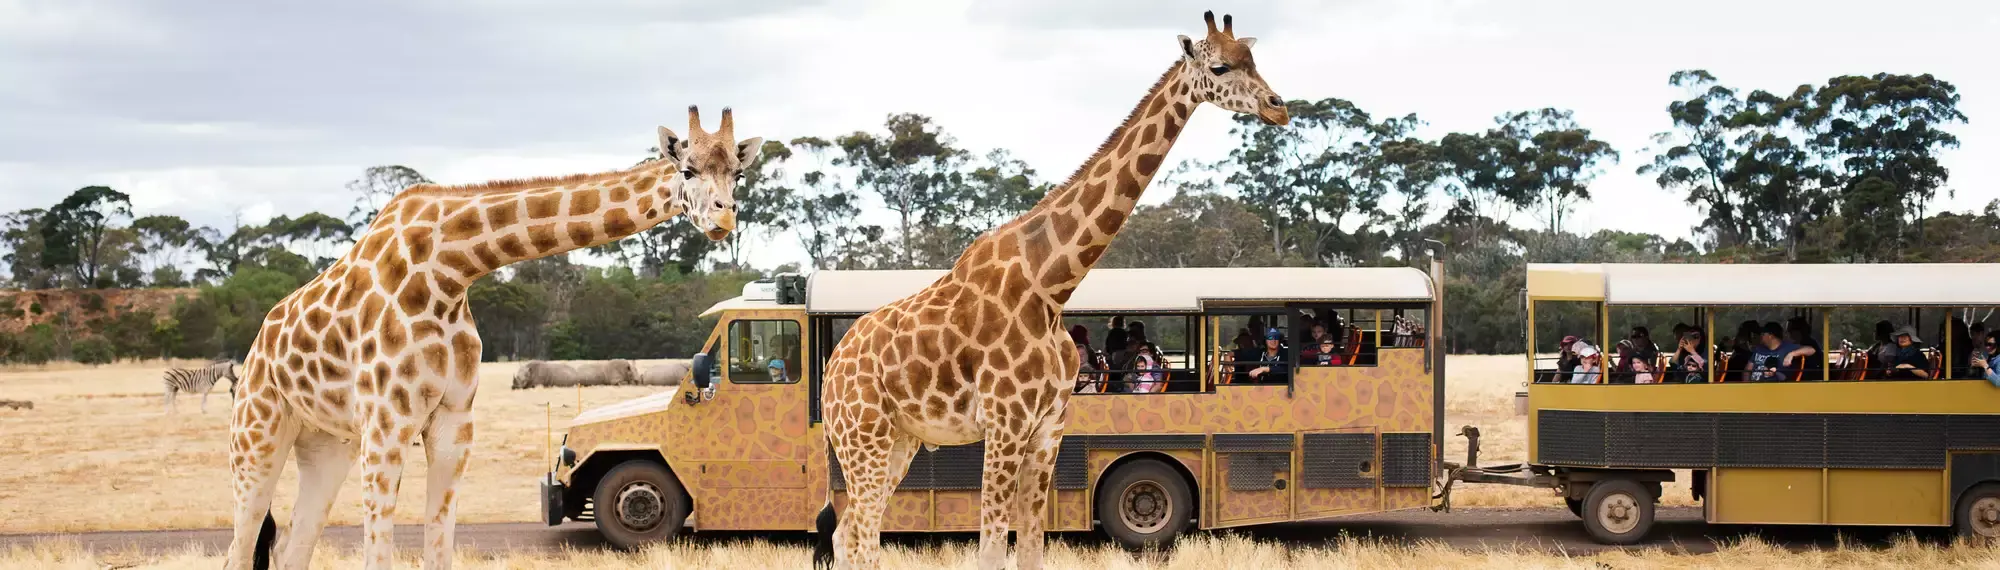 Two giraffe standing in front of a giraffe-print bus full of people.